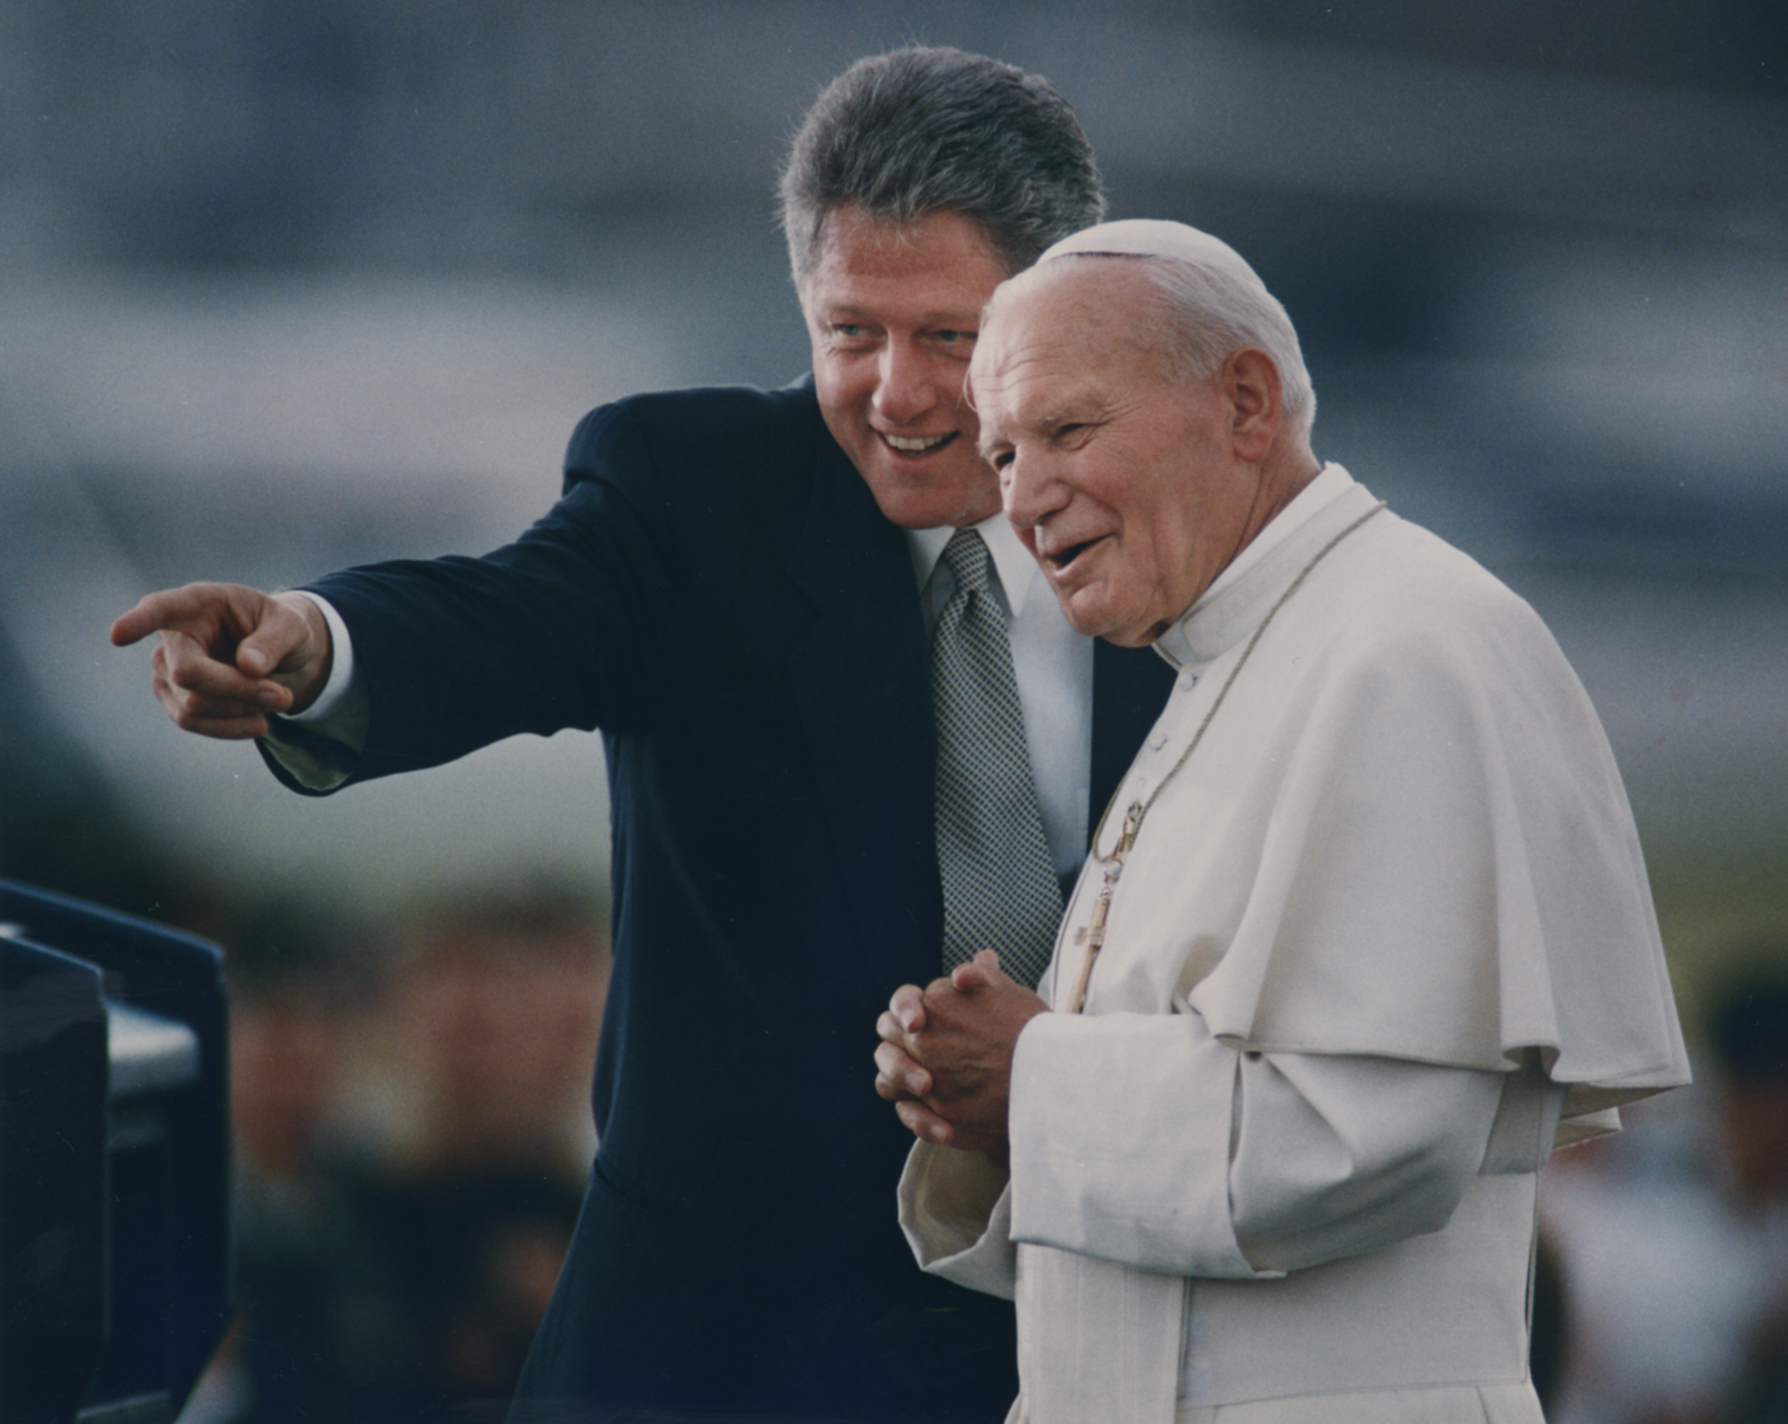 President Bill Clinton and Pope John Paul II stand before a crowd, smiling.